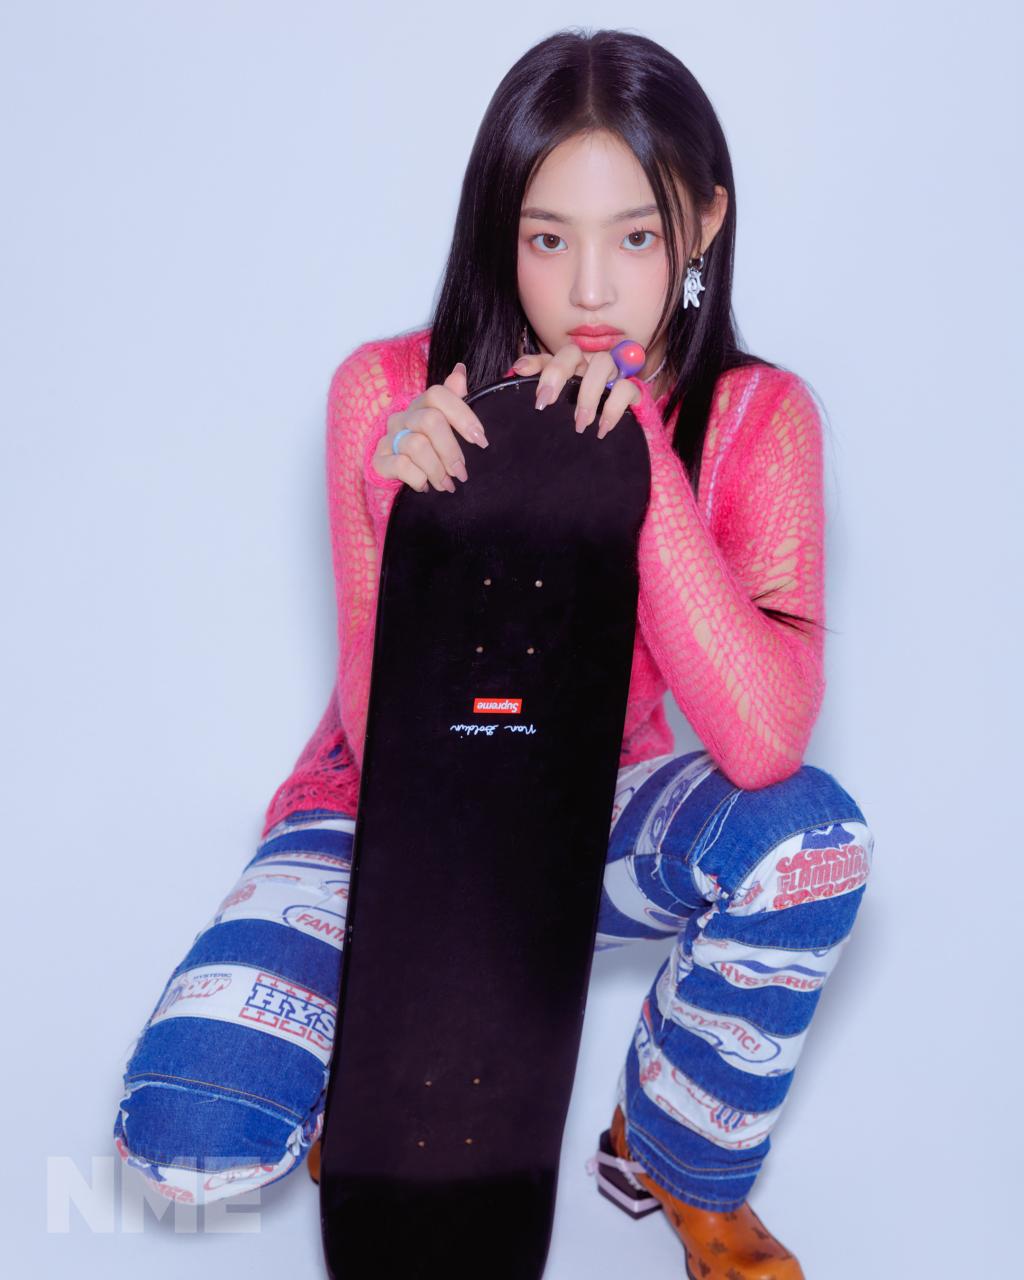 NME-NEWJEANS-Credit-Siyoung-Song-1@2160x2700.jpg